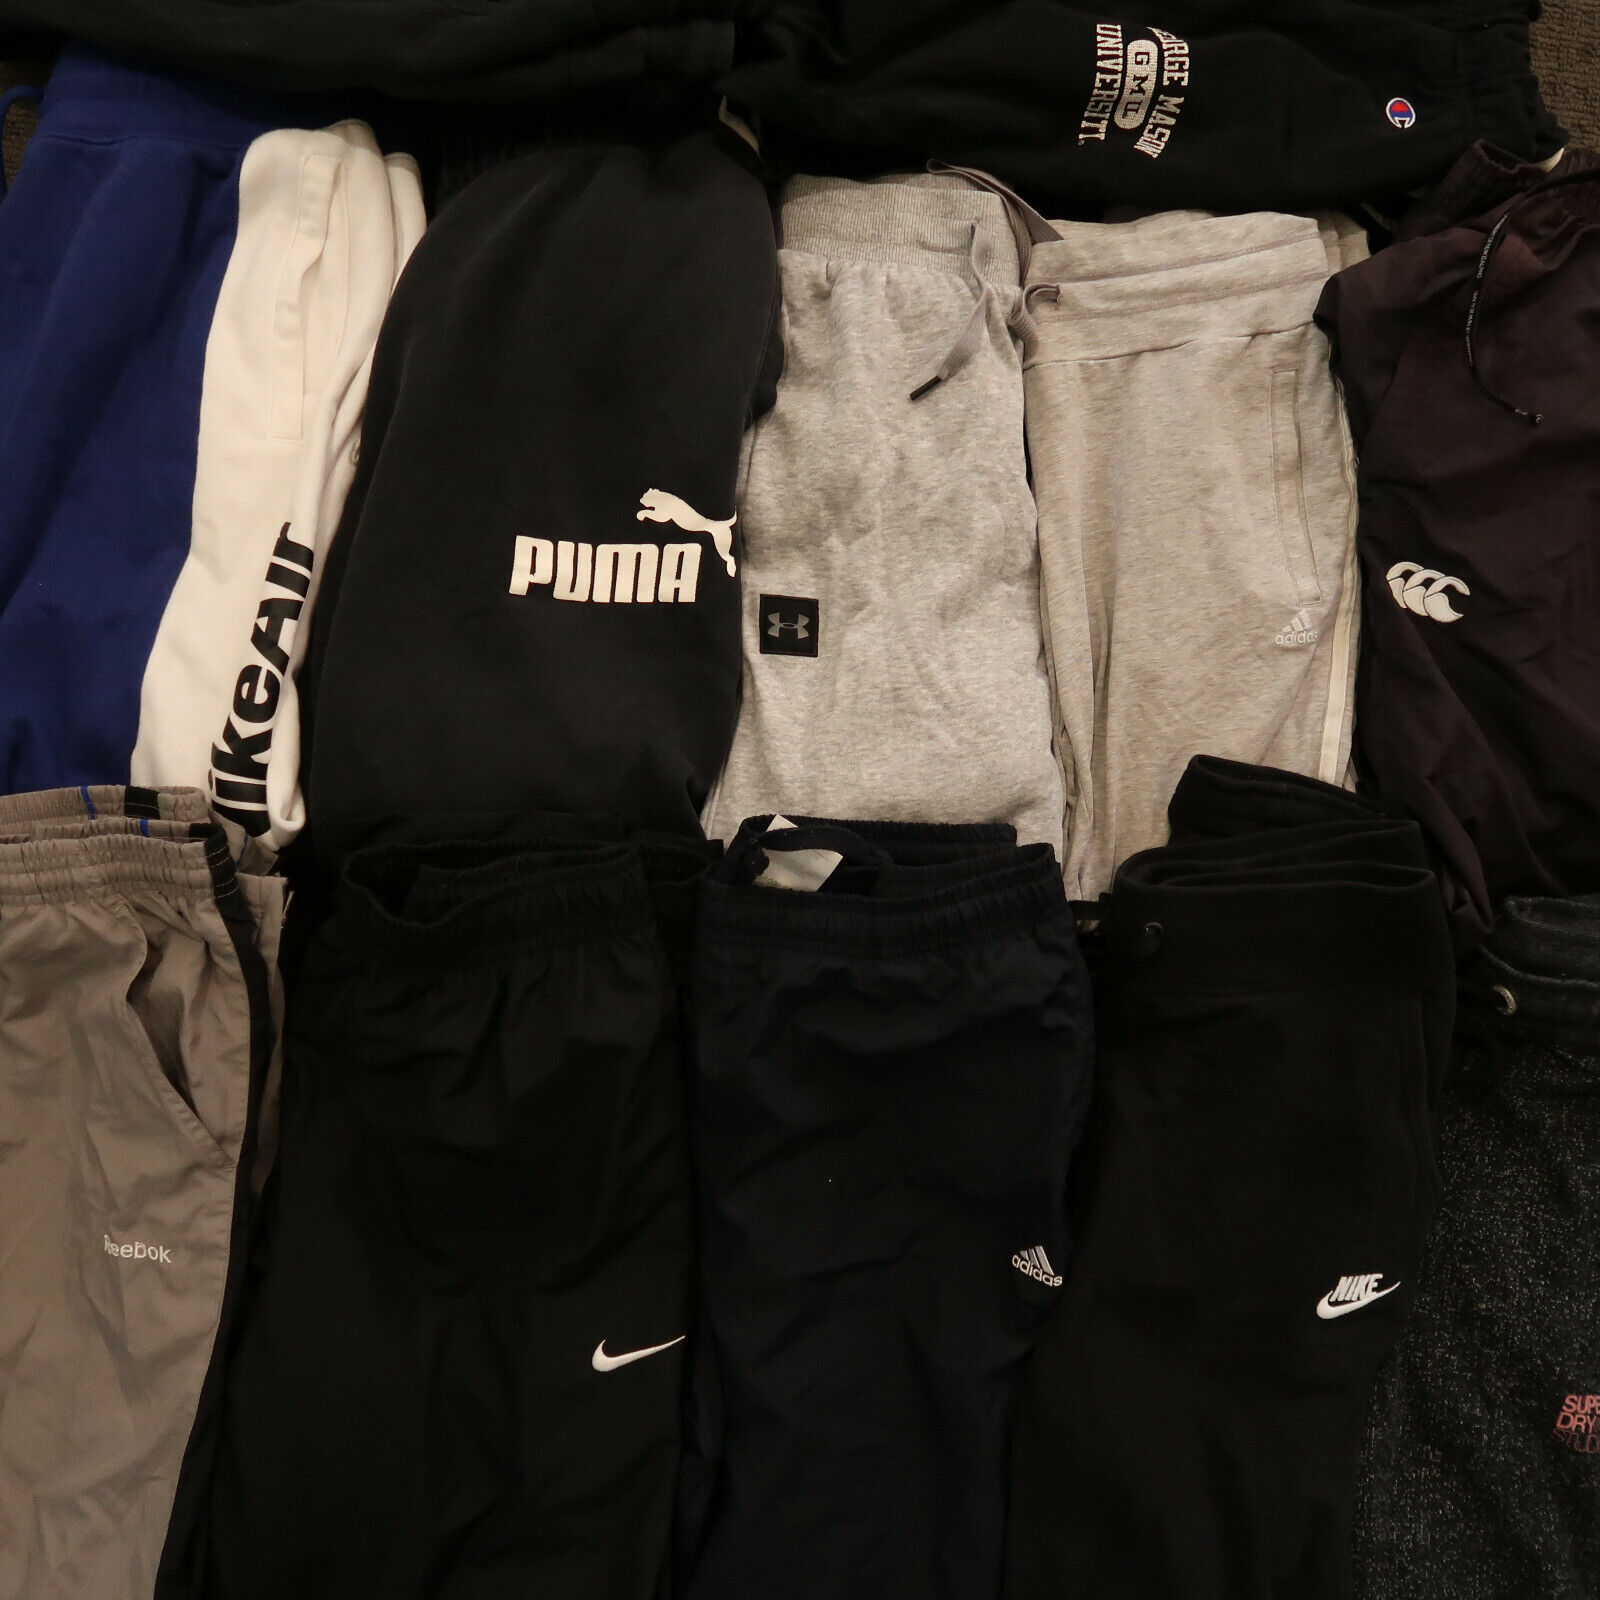 10x Track Pants Branded Nike Adidas Clothing Reseller Wholesale Bulk Lot Bundle Assorted Does Not Apply